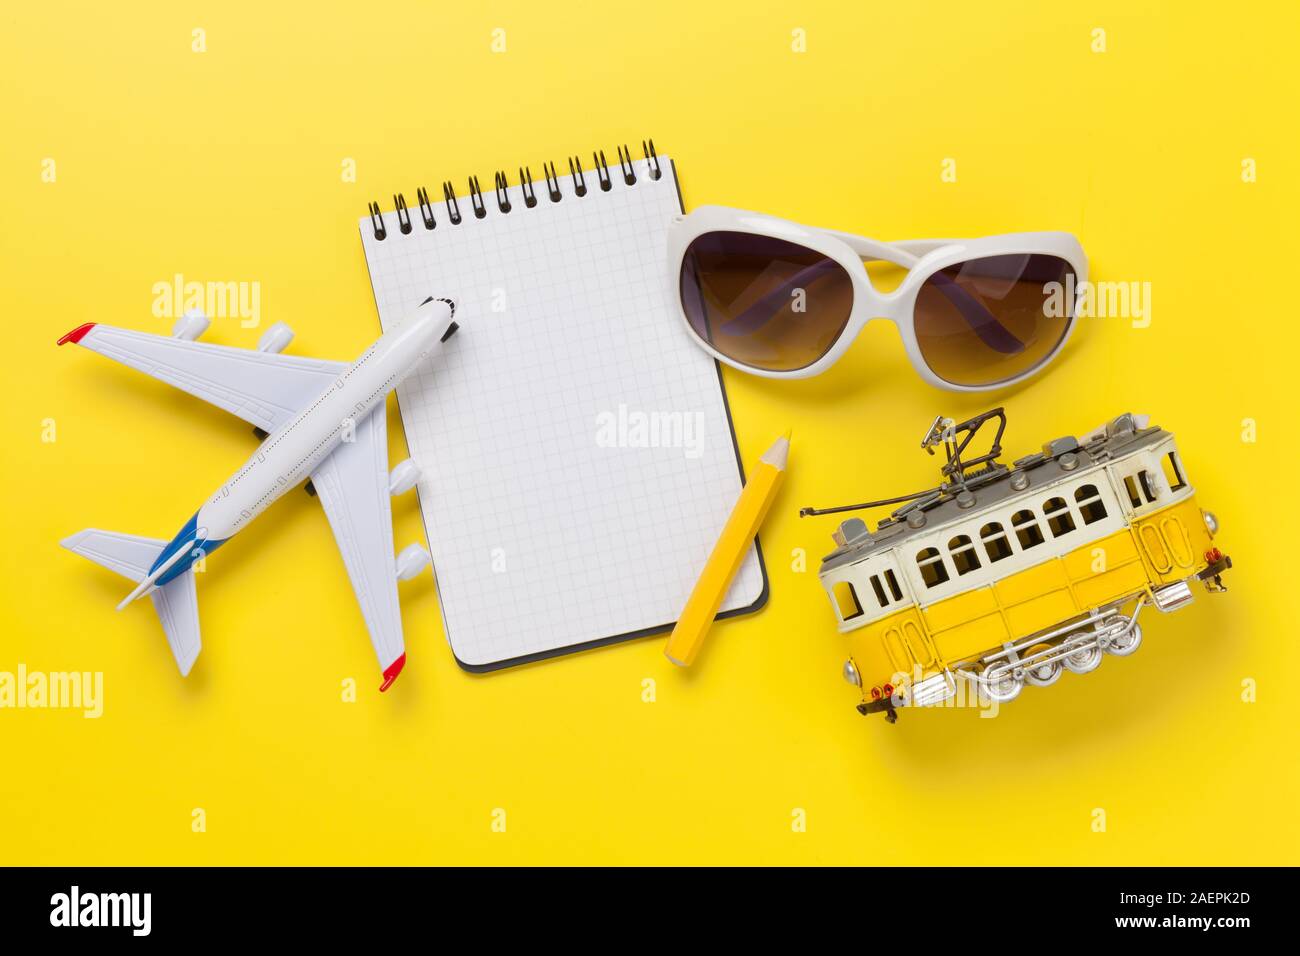 Travel concept with photos, airplane toy, tram and notepad. Top view flat lay with copy space Stock Photo